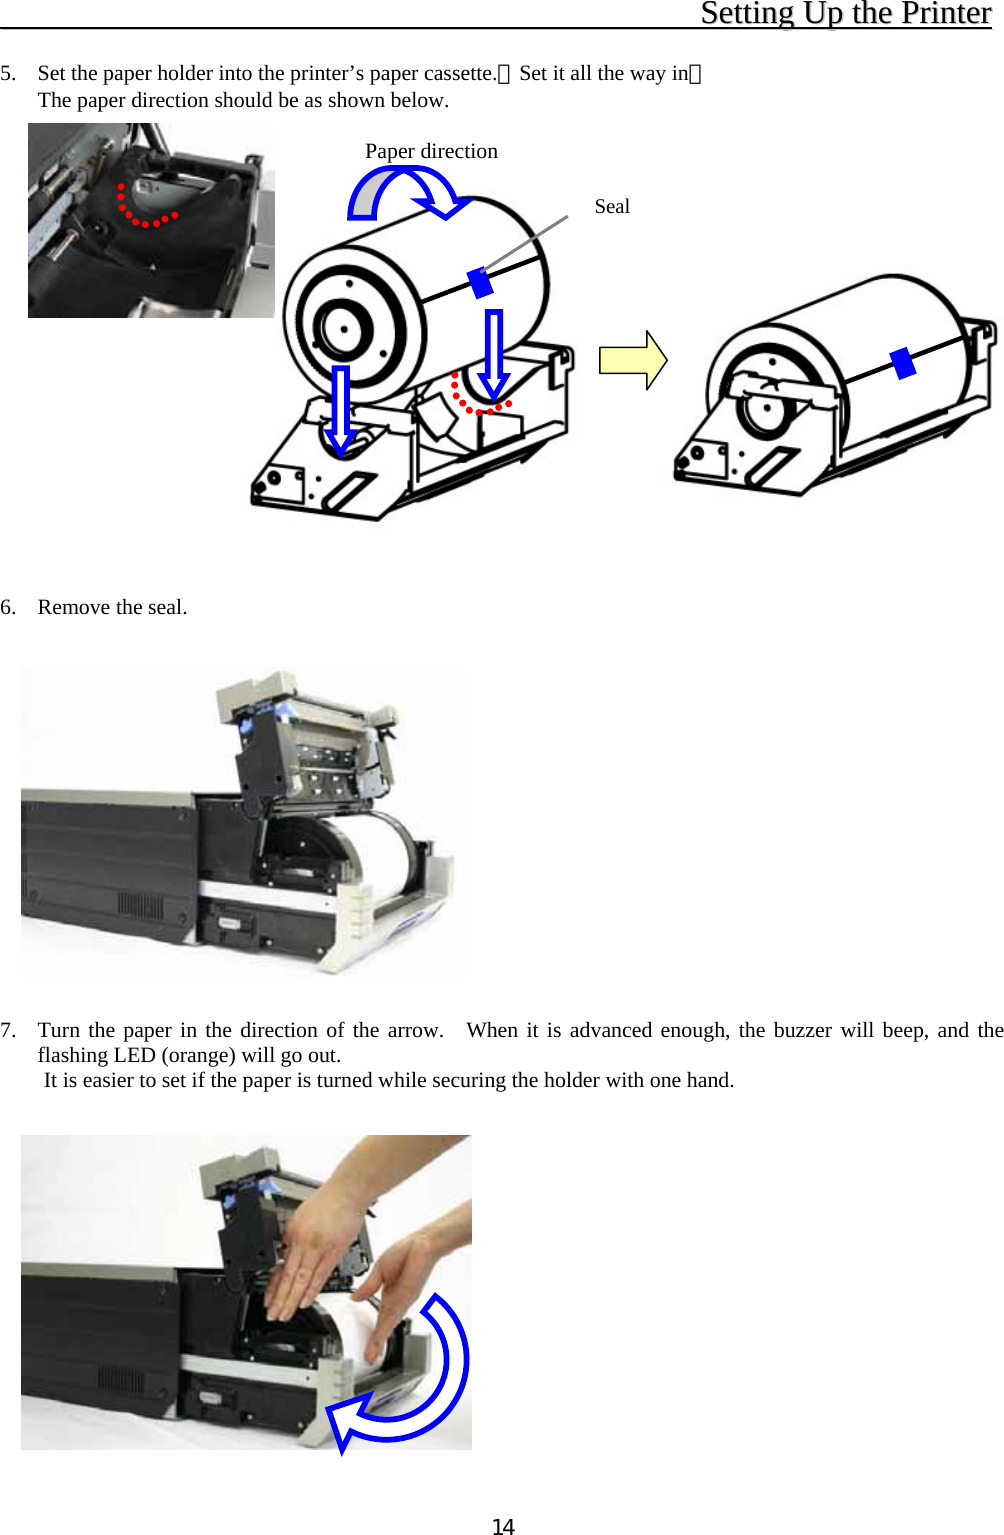   14                                              SSeettttiinngg  UUpp  tthhee  PPrriinntteerr   5.  Set the paper holder into the printer’s paper cassette.（Set it all the way in） The paper direction should be as shown below.                  6.  Remove the seal.               7.  Turn the paper in the direction of the arrow.  When it is advanced enough, the buzzer will beep, and the flashing LED (orange) will go out. It is easier to set if the paper is turned while securing the holder with one hand.               Paper direction Seal 